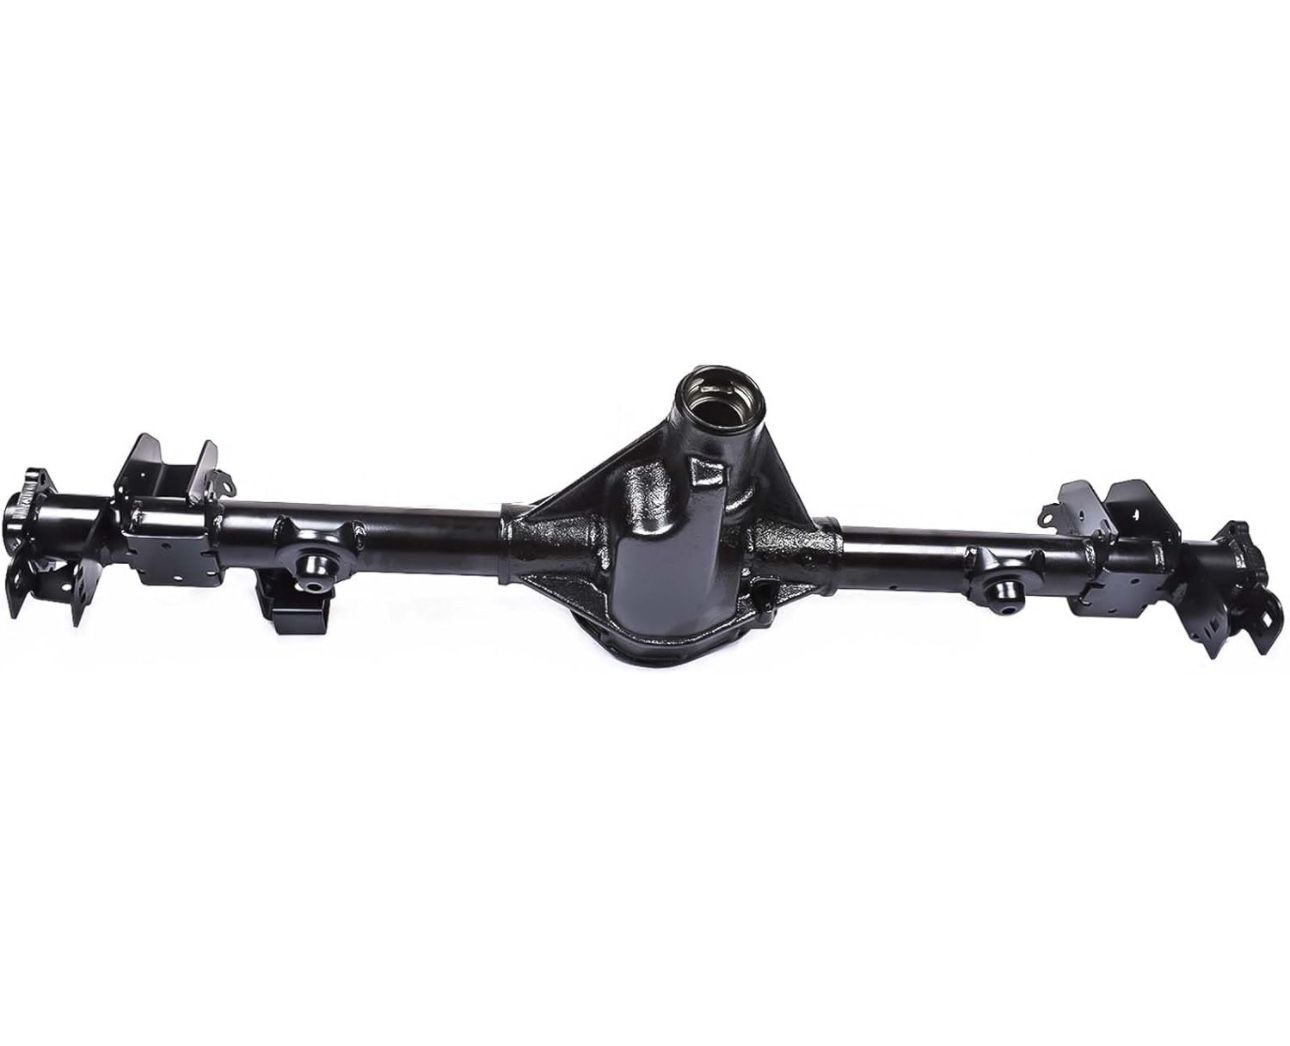 Dana 44 Rear Axle Housing Assembly Replacement for 2007-2015 Jeep Wrangler Rubicon (contact info removed)2AA